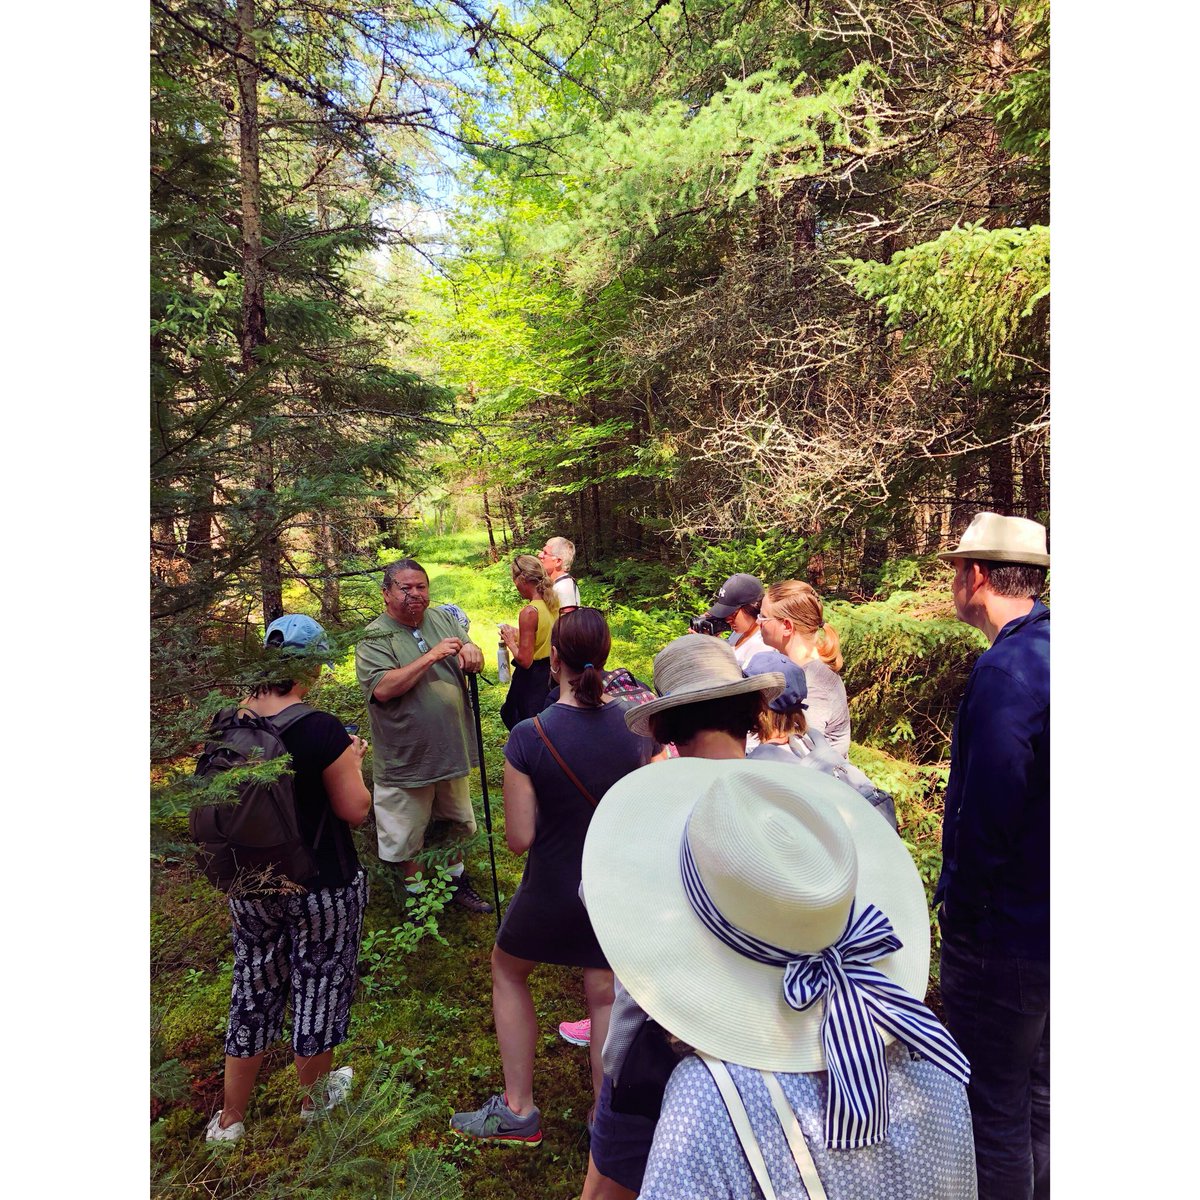 #AtlanticIMN Summer Institute attendees explored 30+ plants during a medicine walk with @tumayoung and Nick today! #EducationfromtheLand